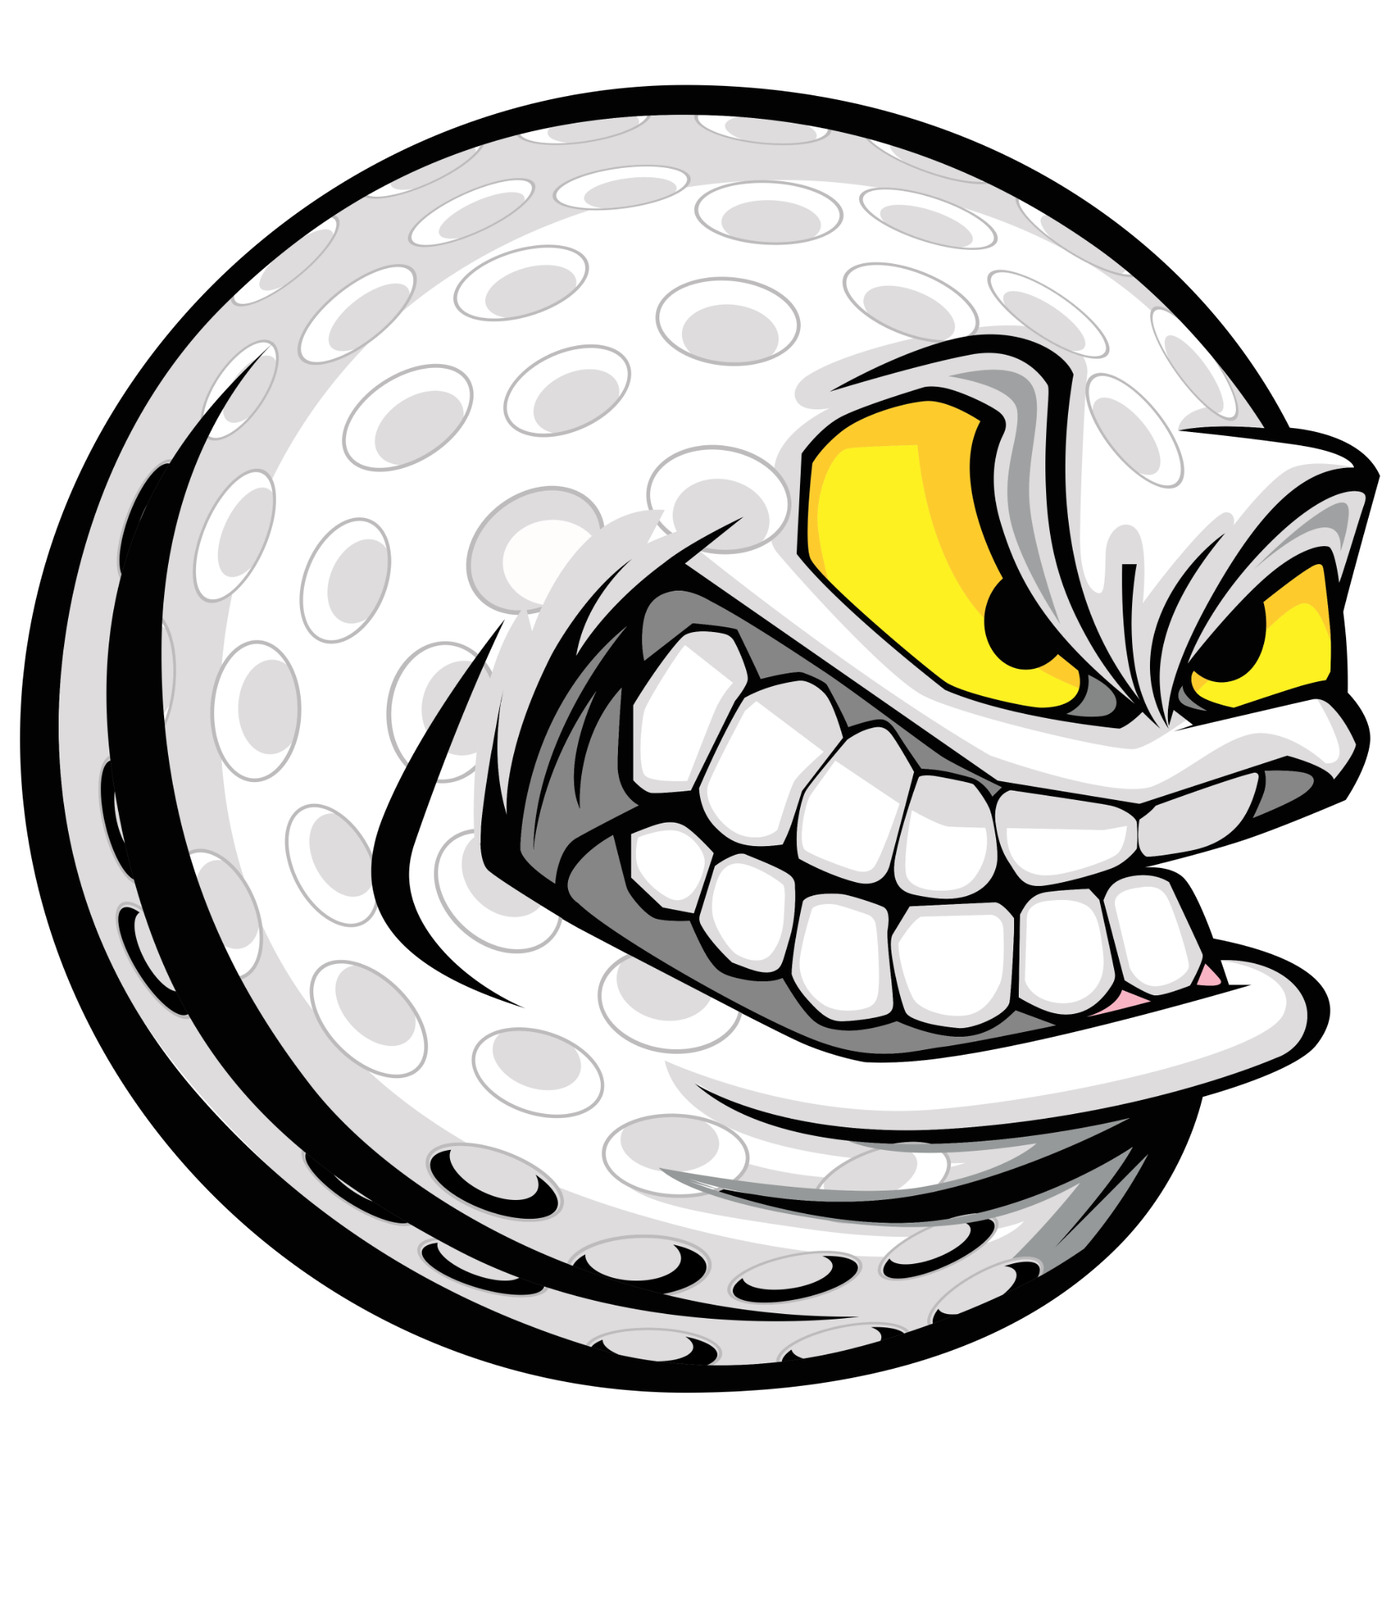 MEAN GOLF BALL PGA LIV GOLF  Sticker /  Decal  | 10 Sizes with TRACKING